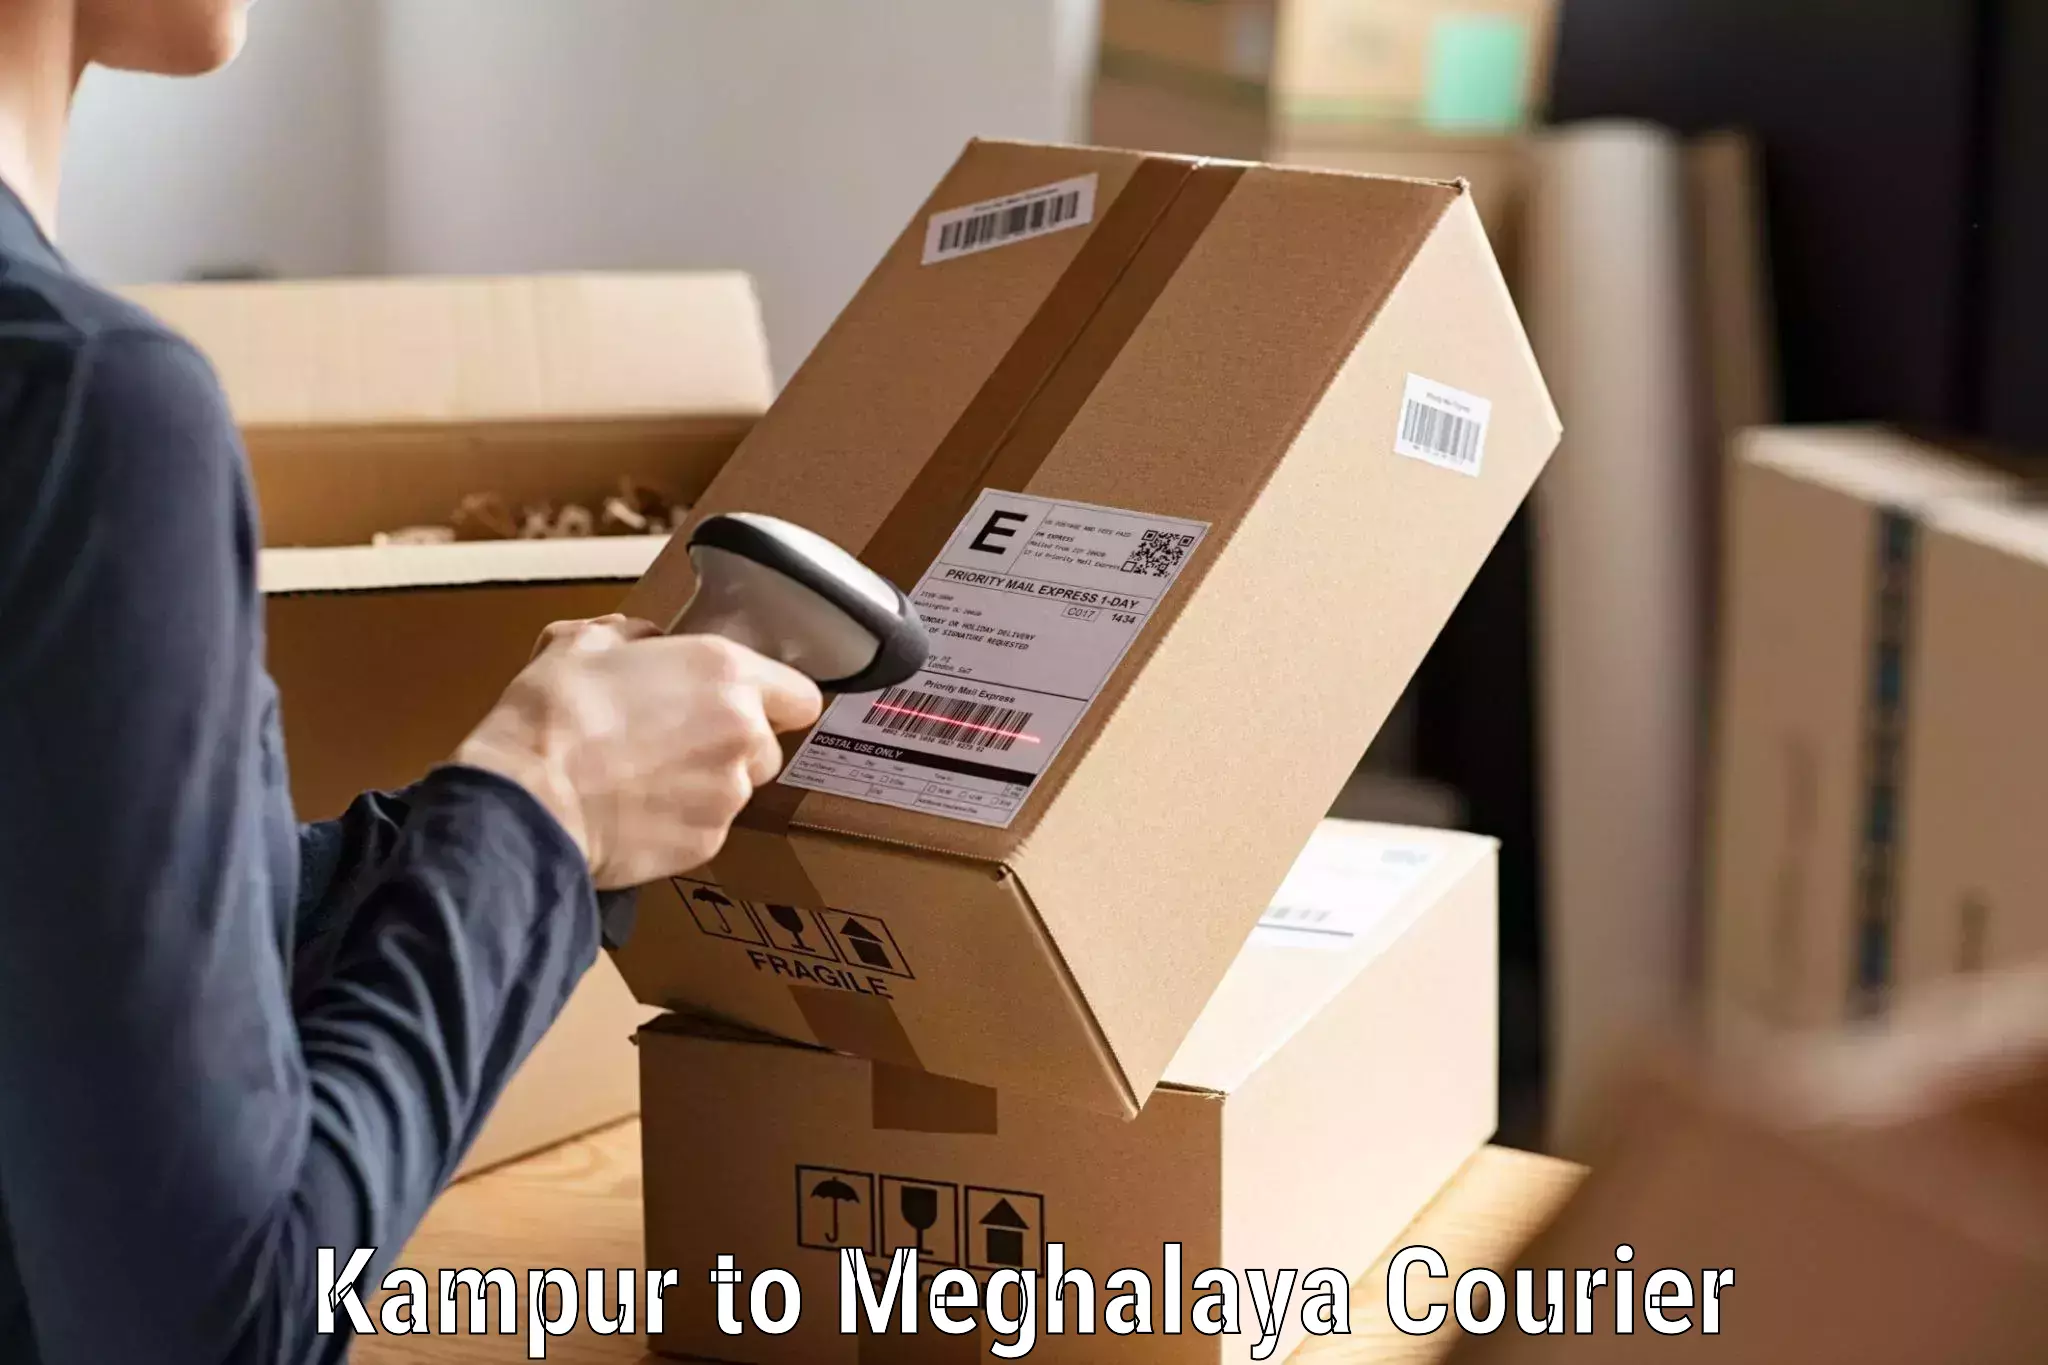 Cash on delivery service in Kampur to Shillong